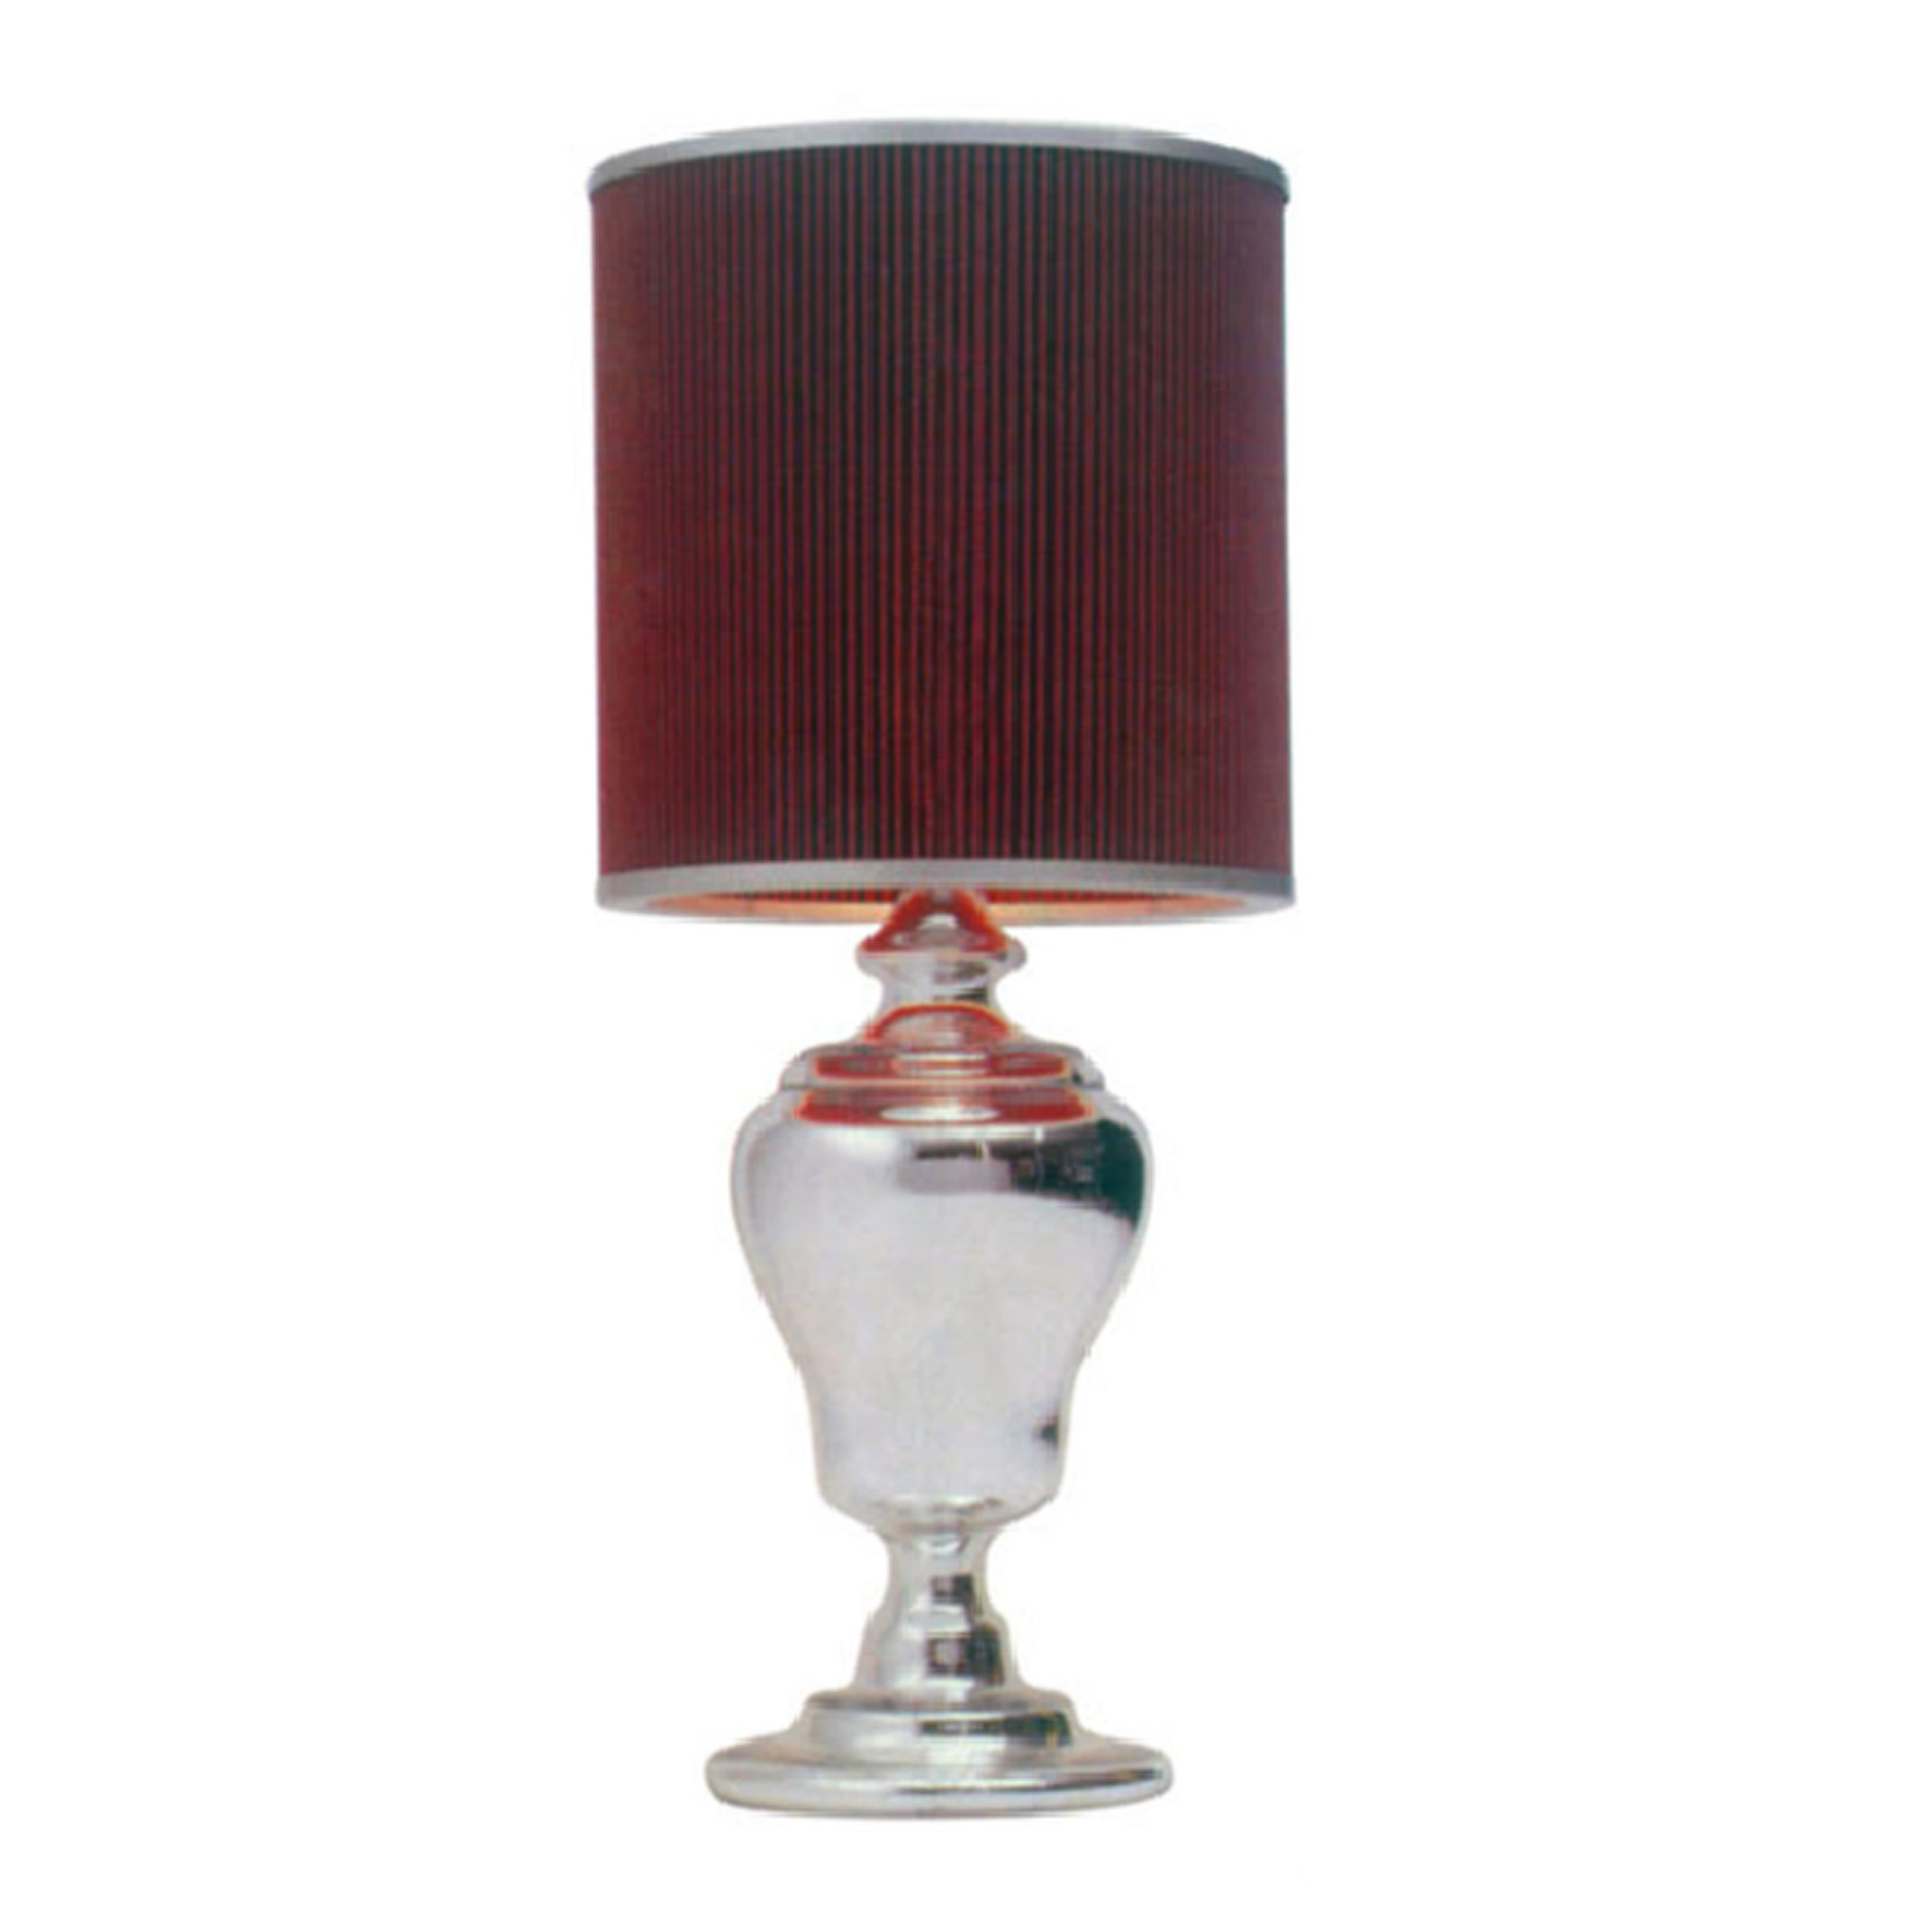 Crystal table lamp DT052-RD-1.Item No.DT052-RD              2.Crystal table lamp DT052-RD                3.Nice appearance, favorable optical design          4.CE, CCC,UL,GSand RoHS compliance